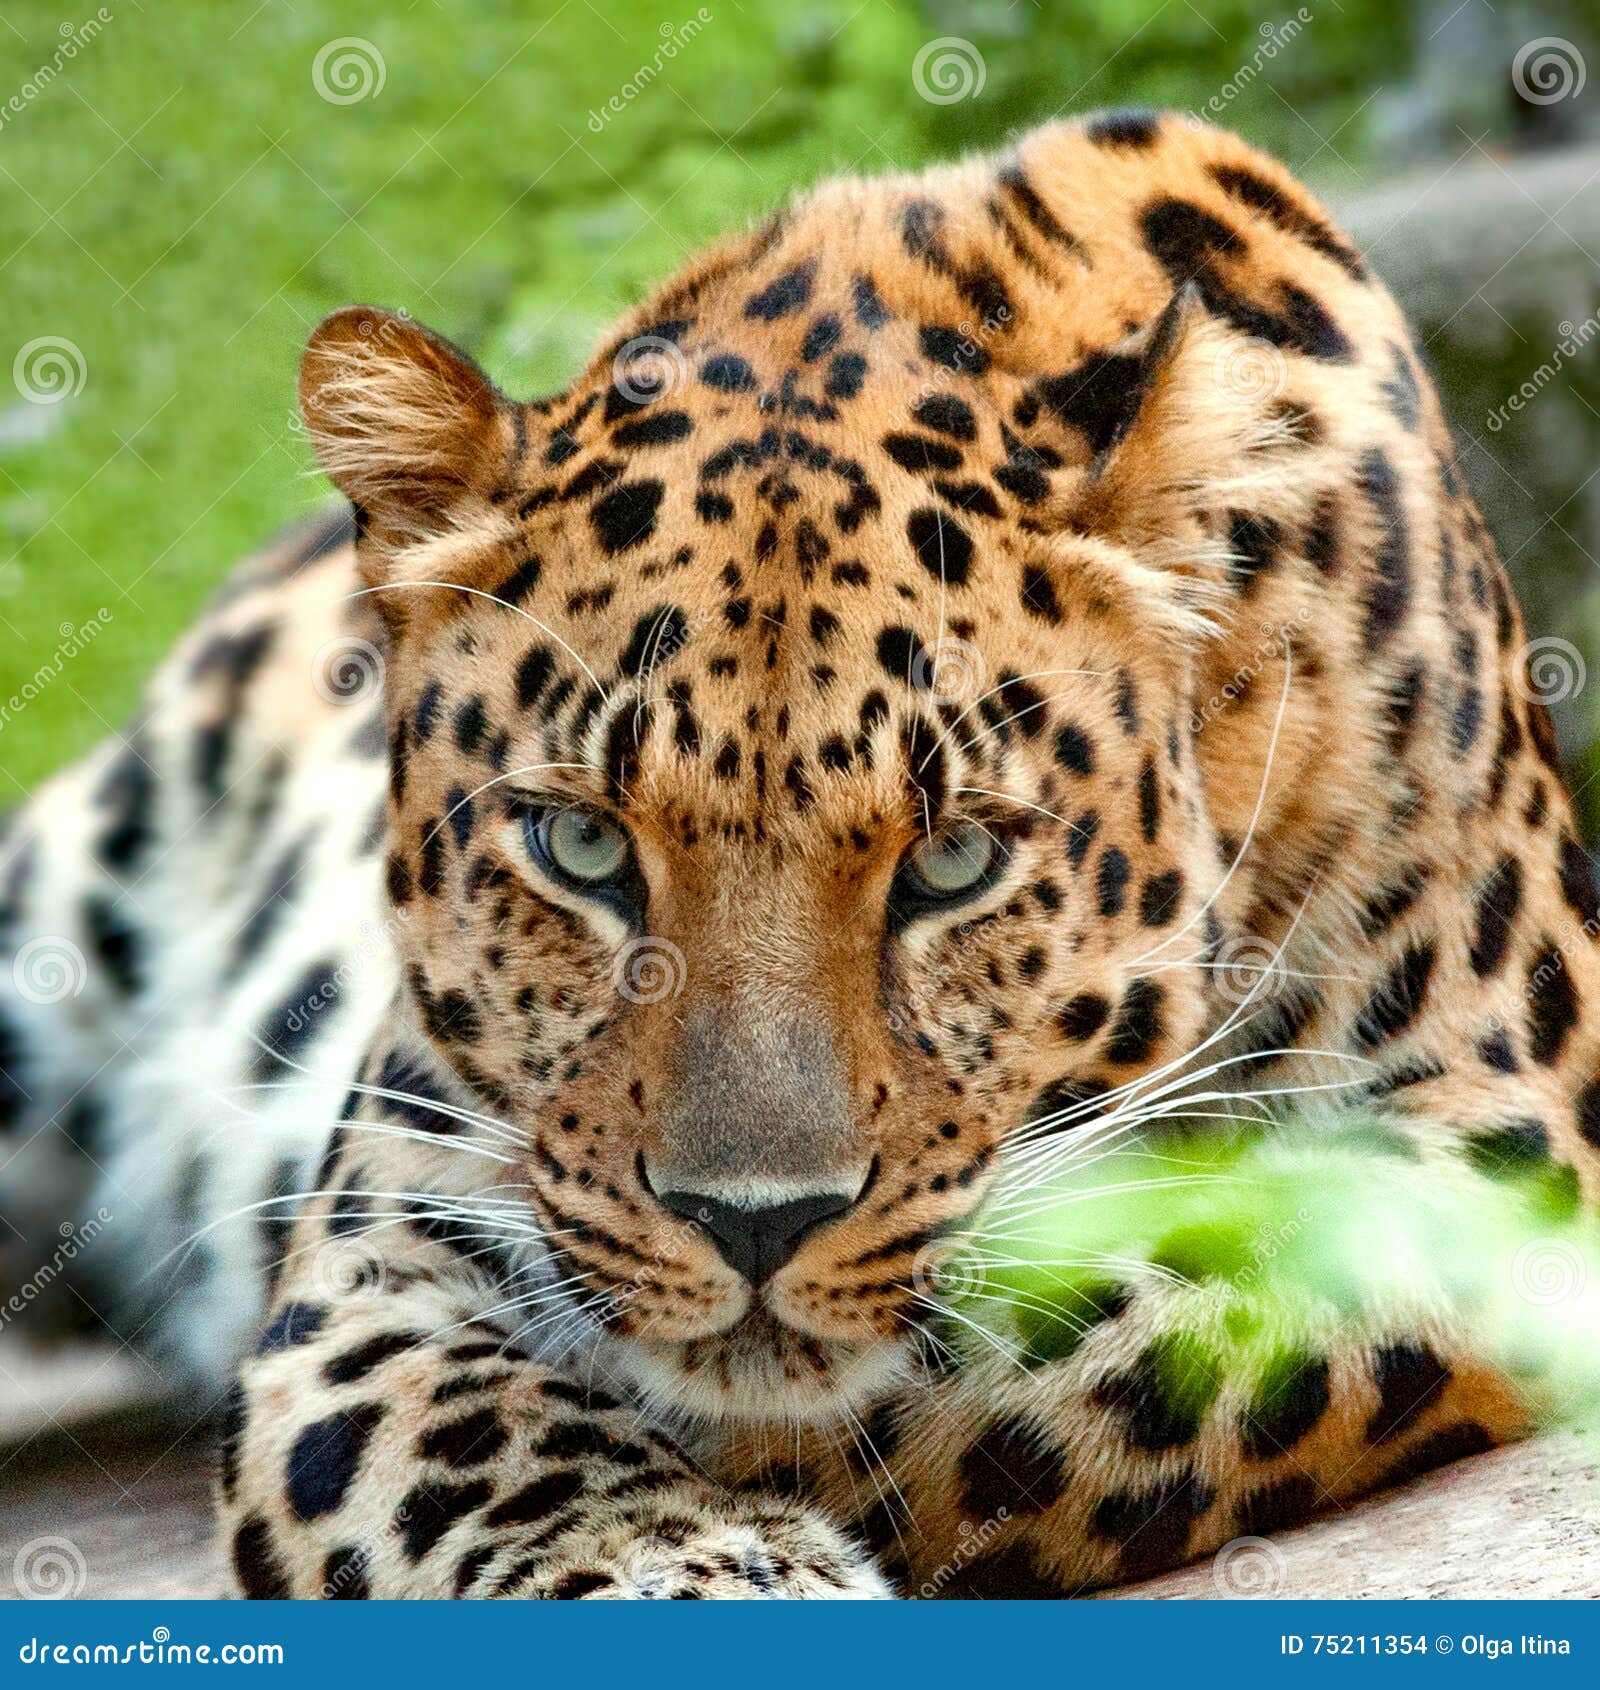 Face of Leopard Closeup Staring at Camera Stock Photo - Image of